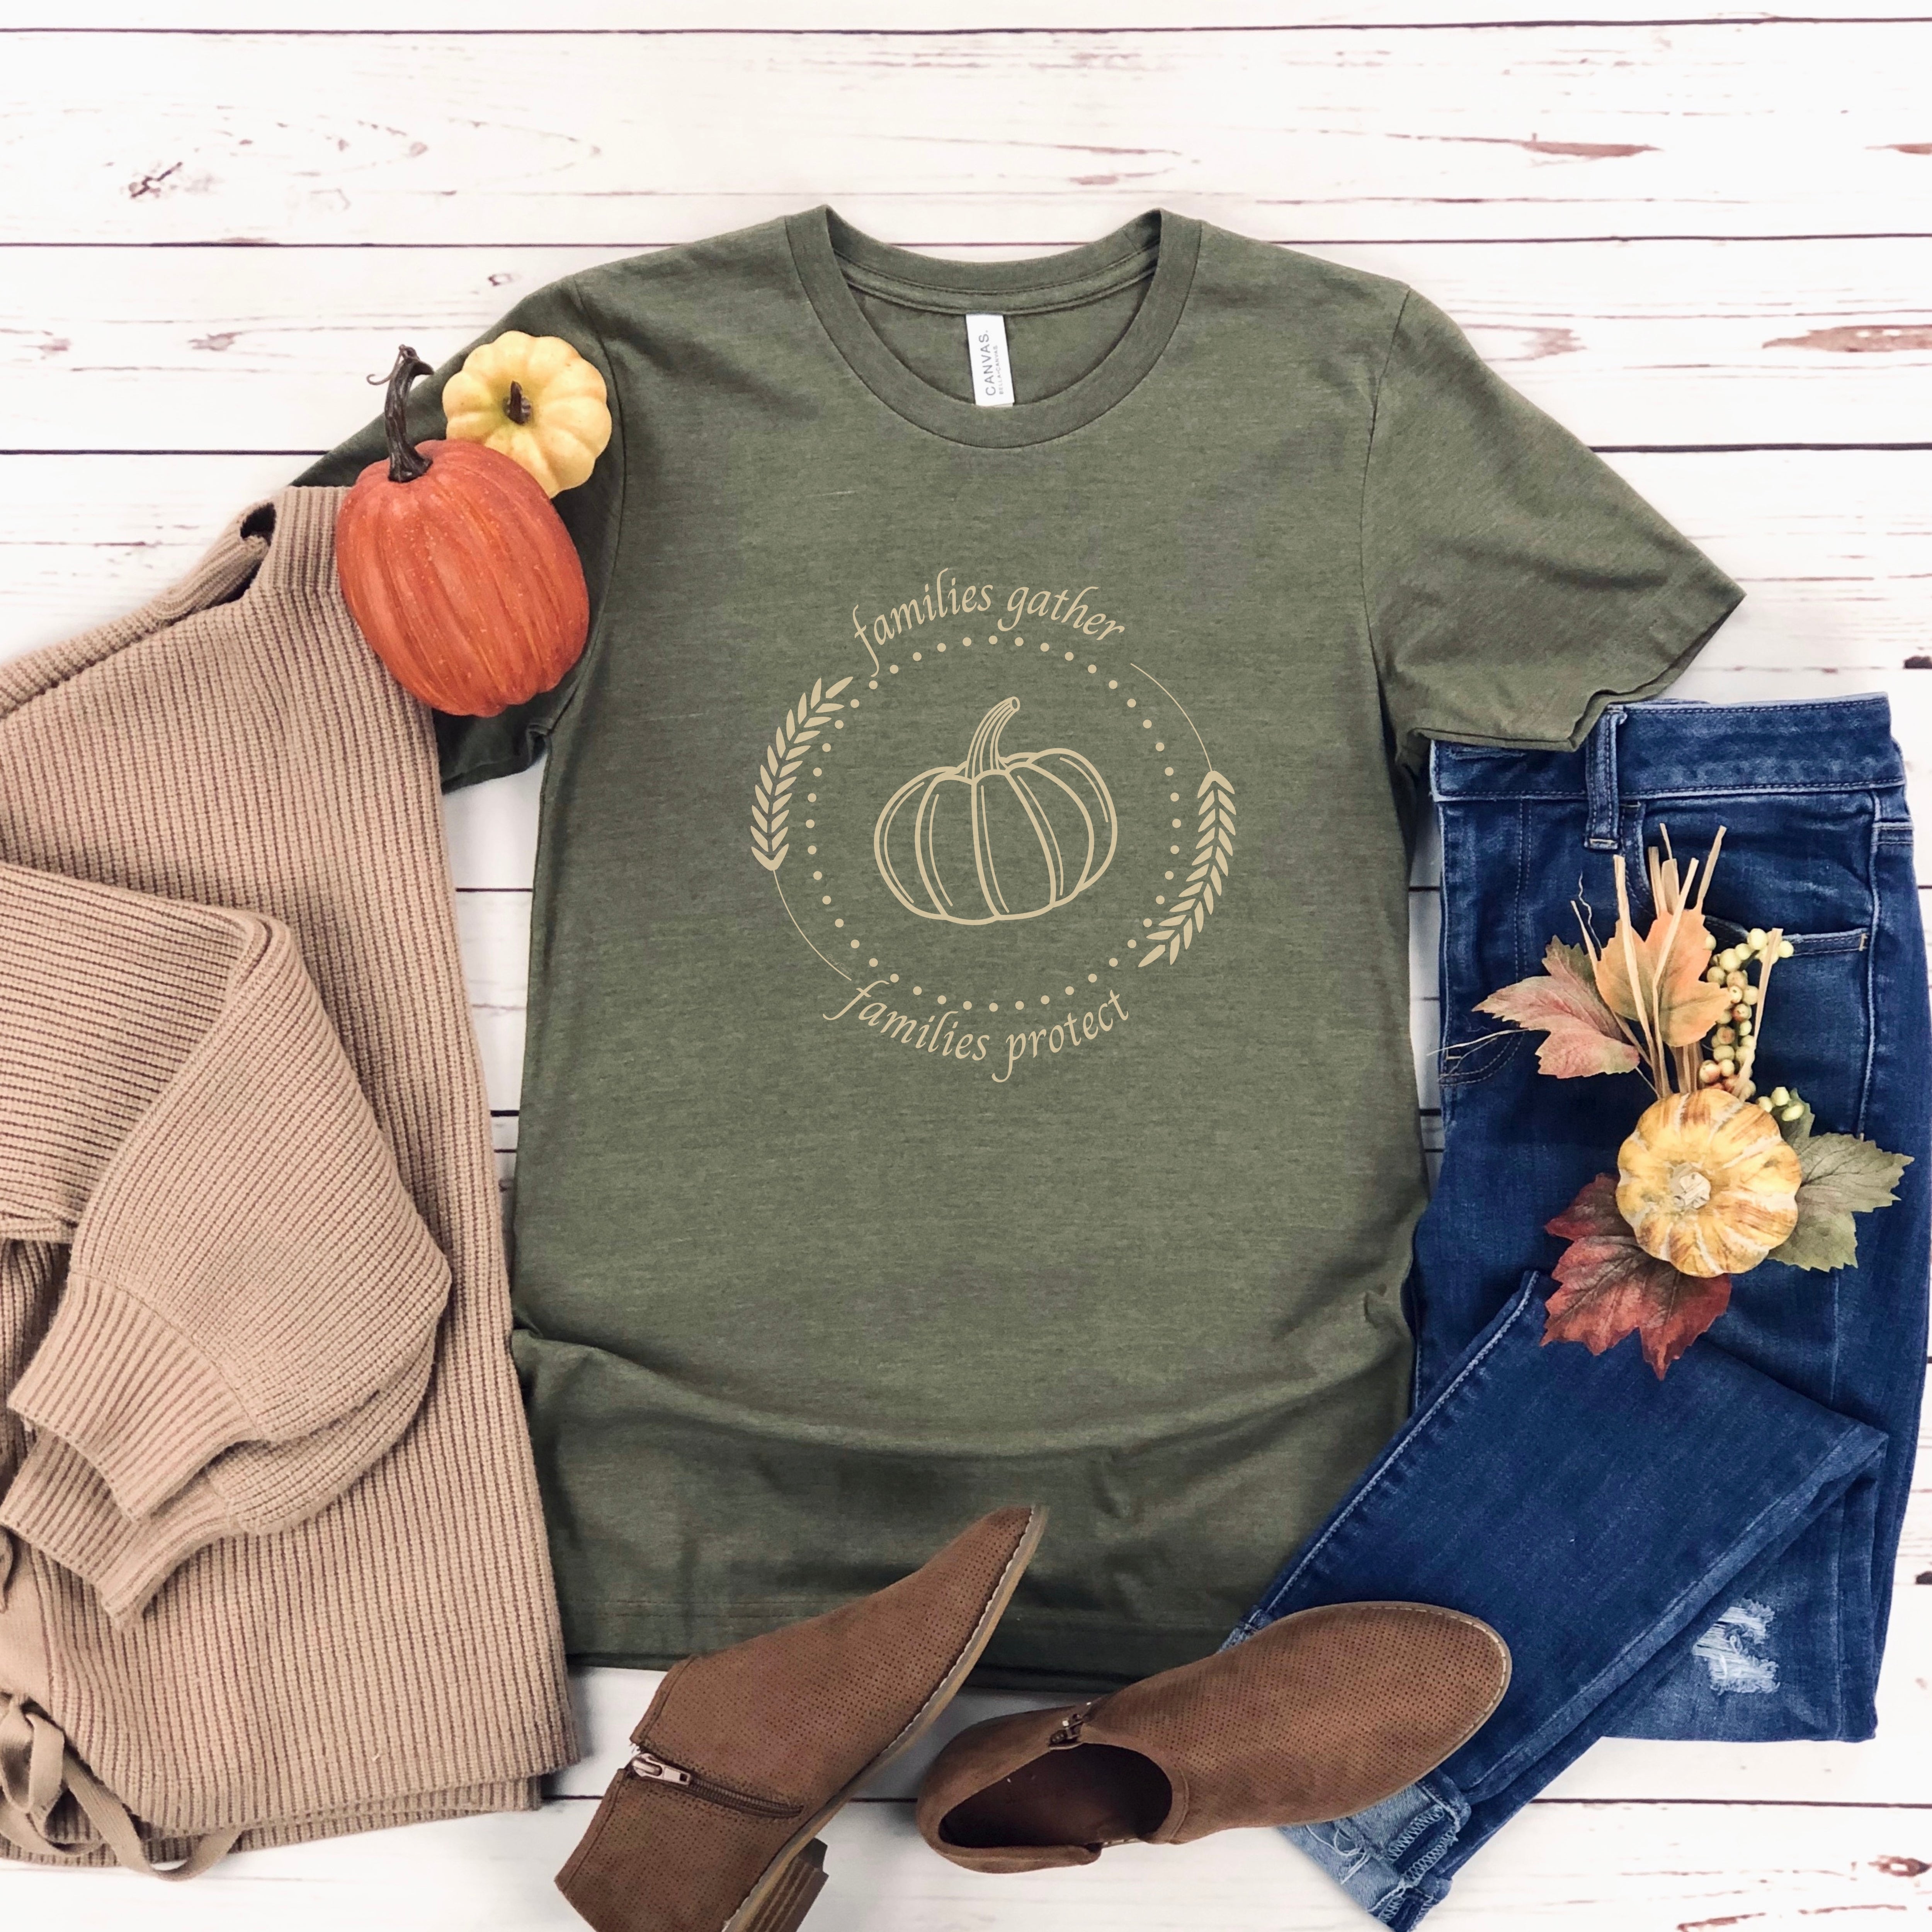 Adorned with a heartwarming autumn-fall harvest pumpkin graphic and the inspiring message Families Gather, Families Protect, this T-shirt stands as a testament to the unwavering support and protection families should offer to survivors.